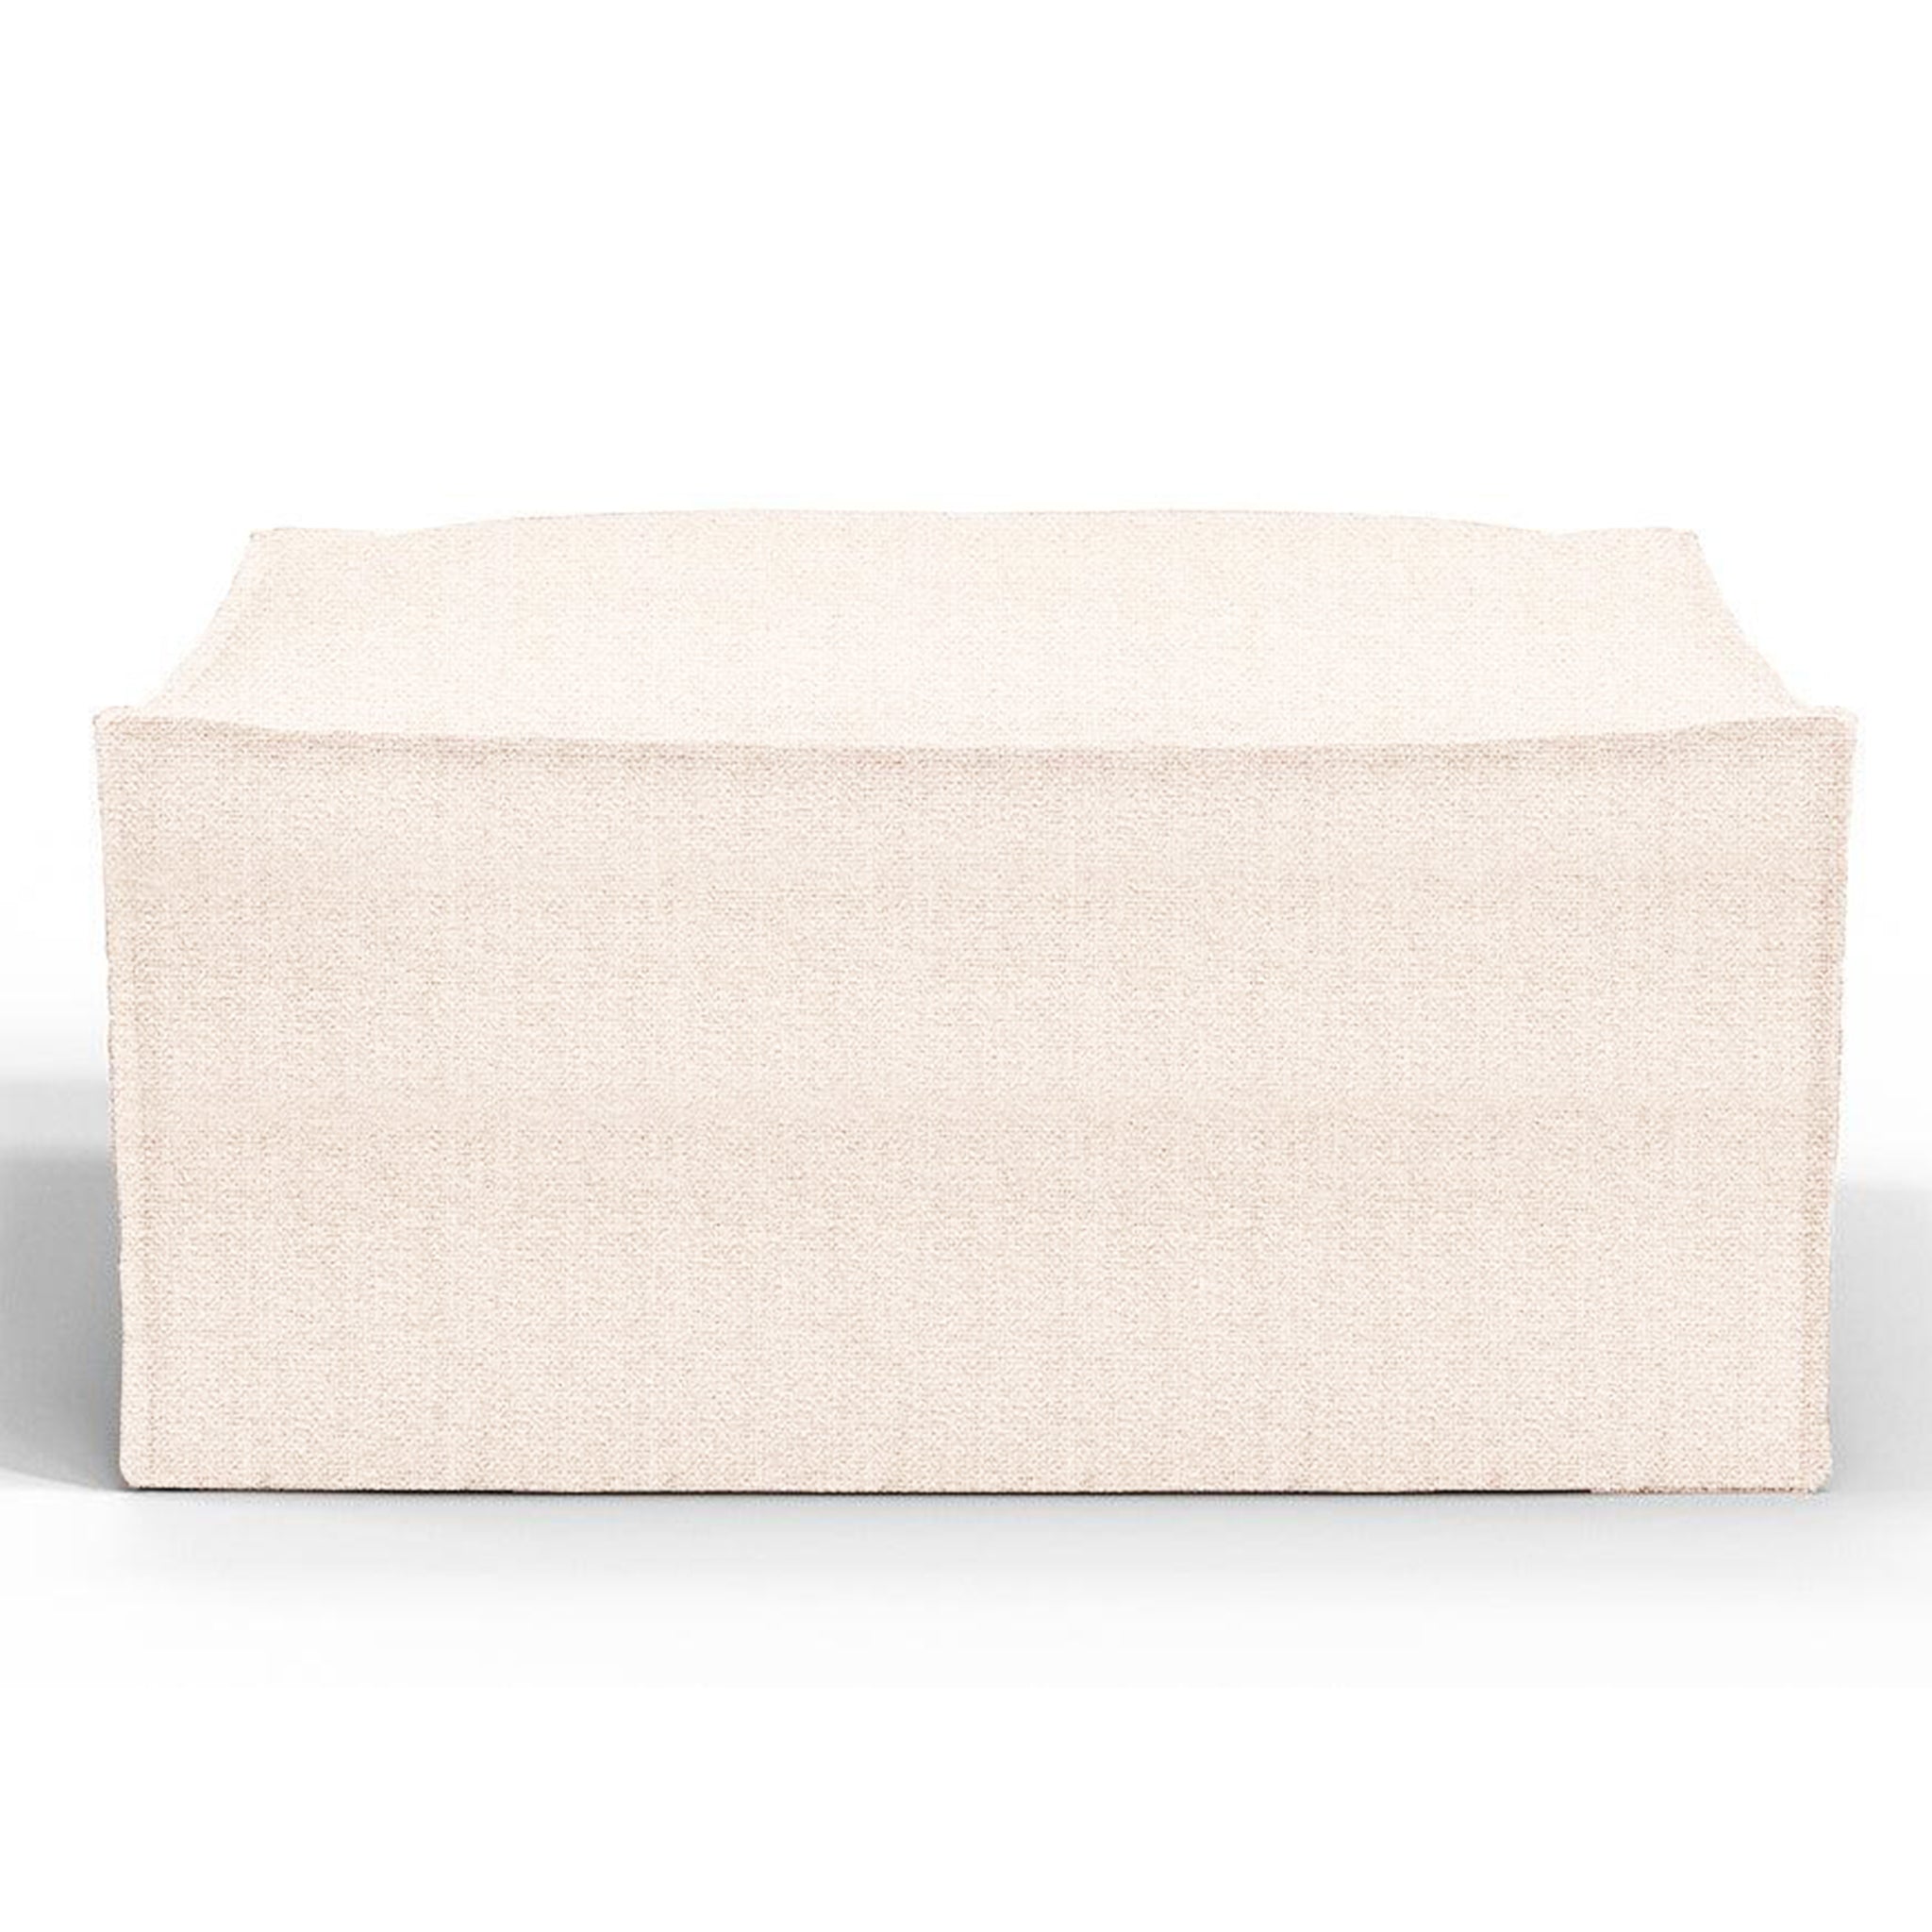 Modern peach-colored ottoman, perfect for adding a soft, elegant accent to contemporary interiors.